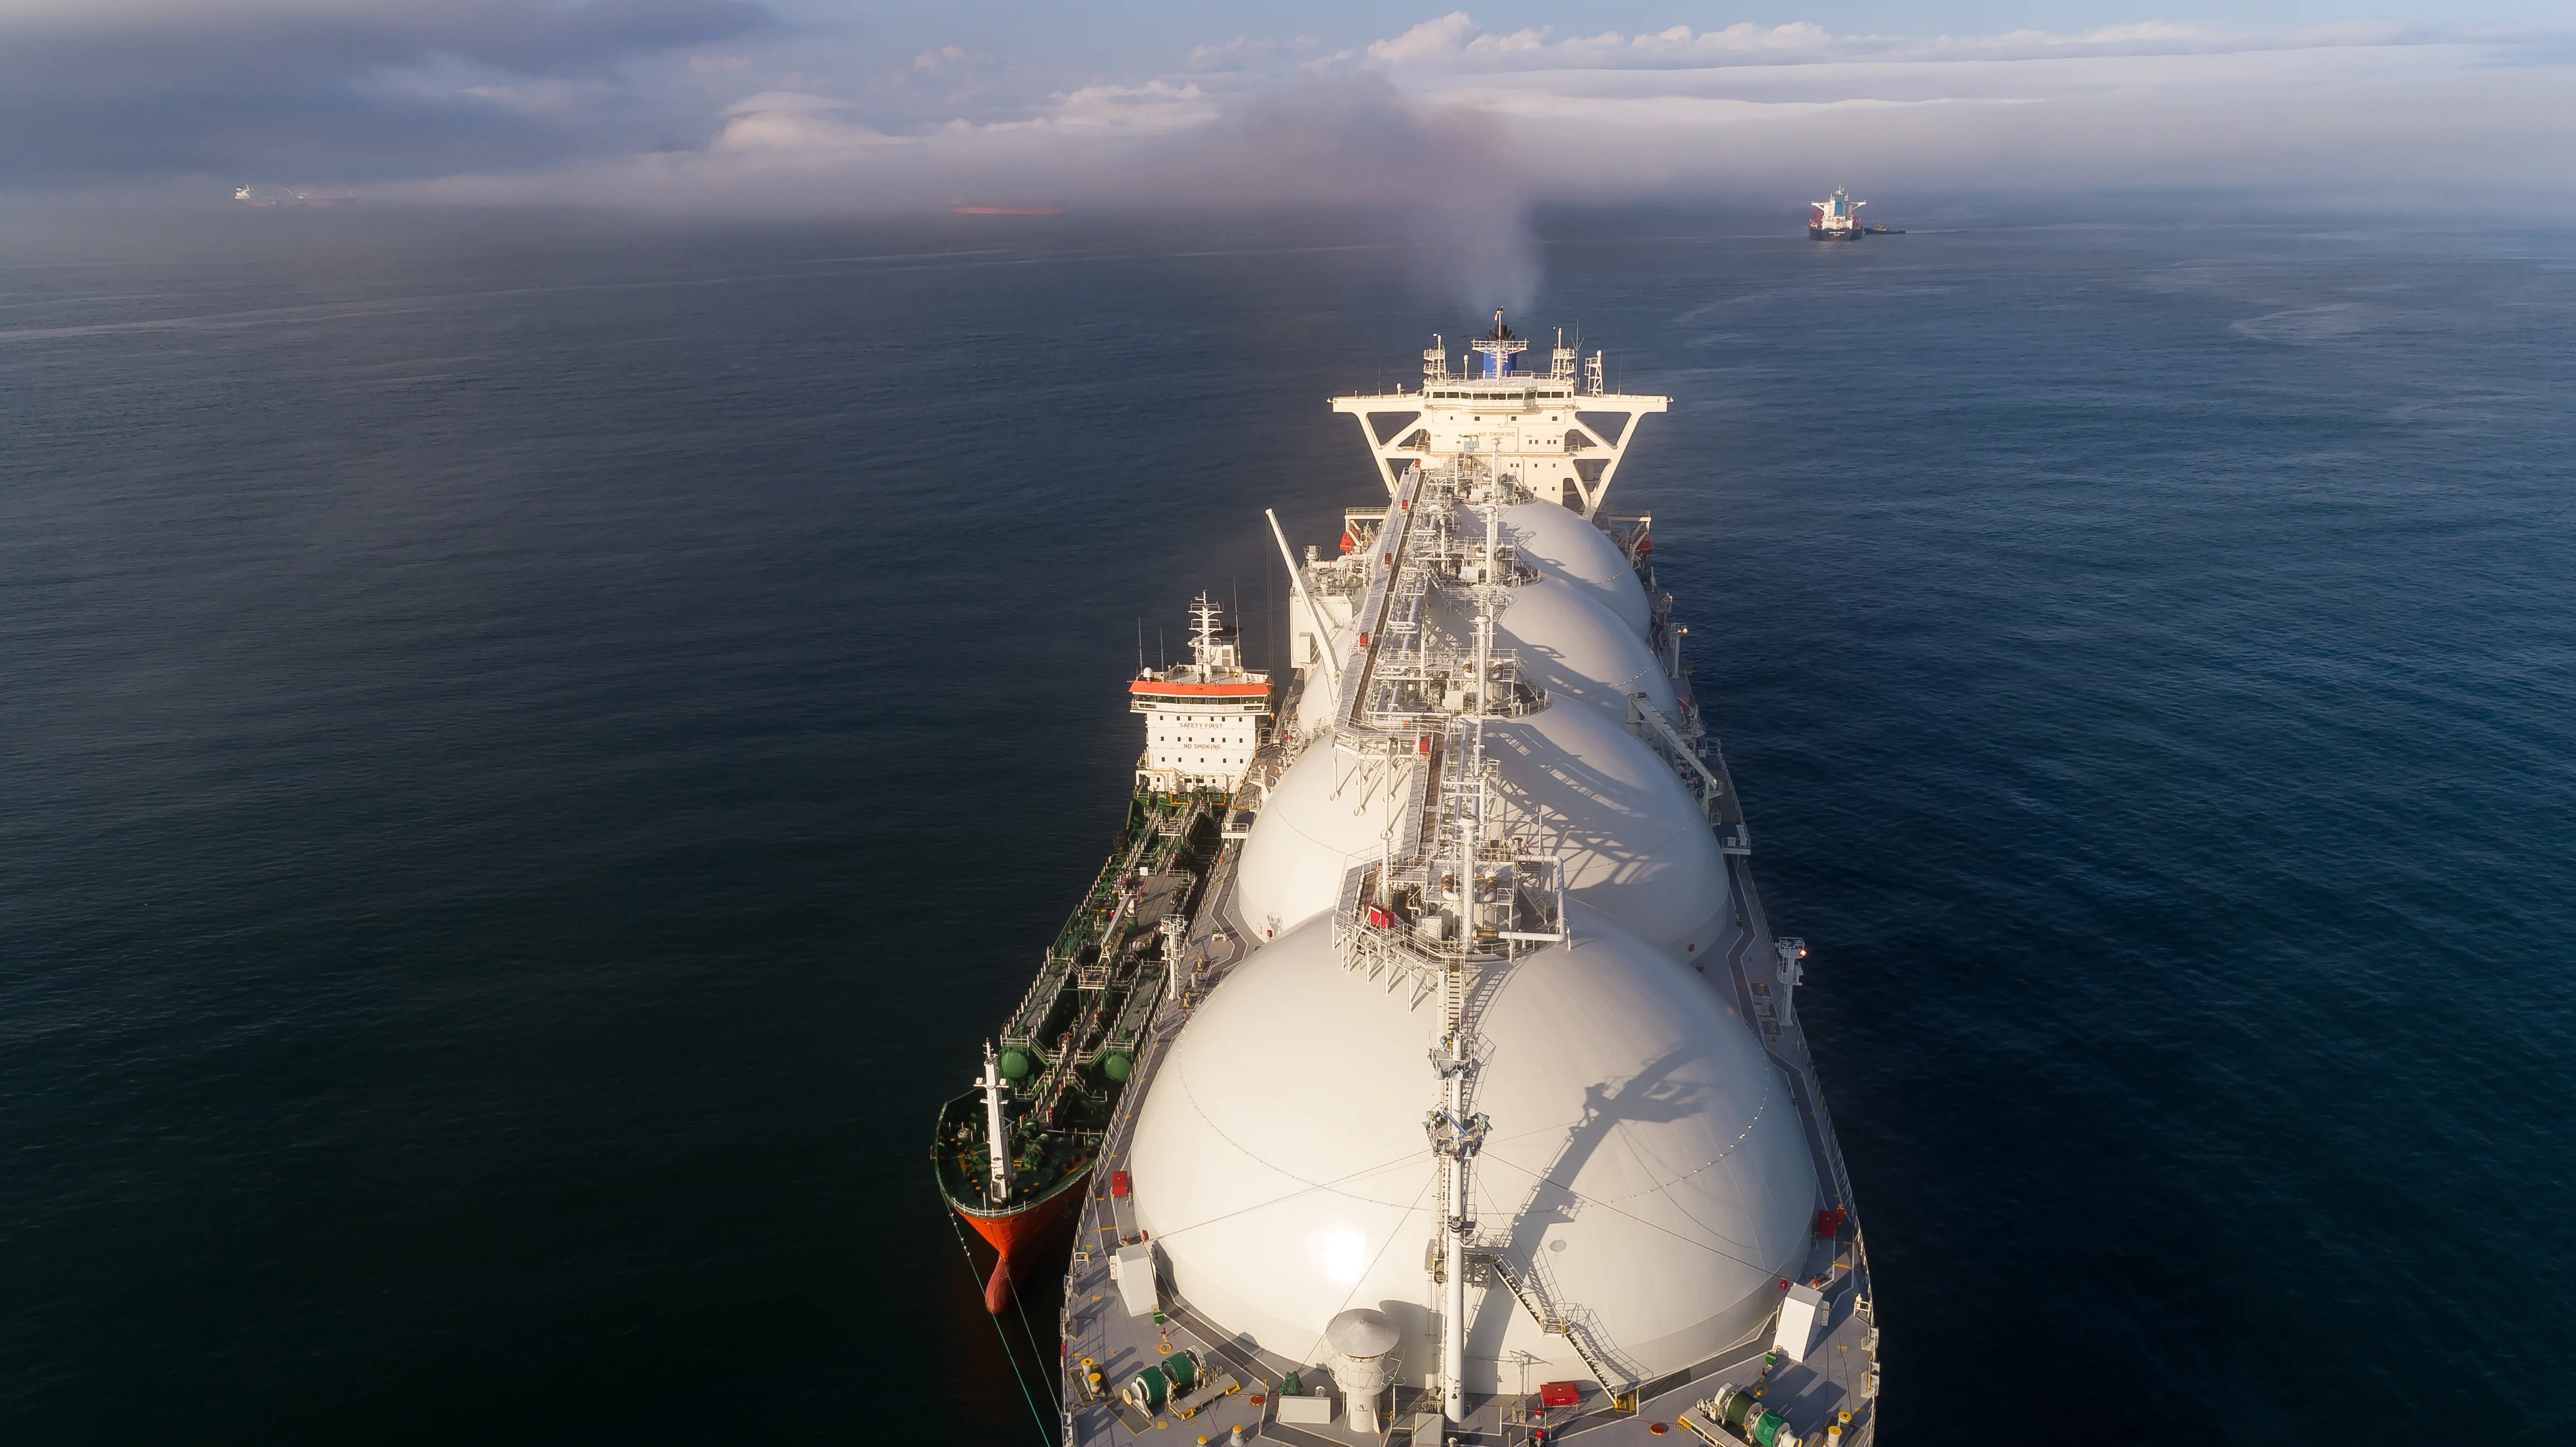 Top view of a large LNG tanker and a tanker standing side by side.